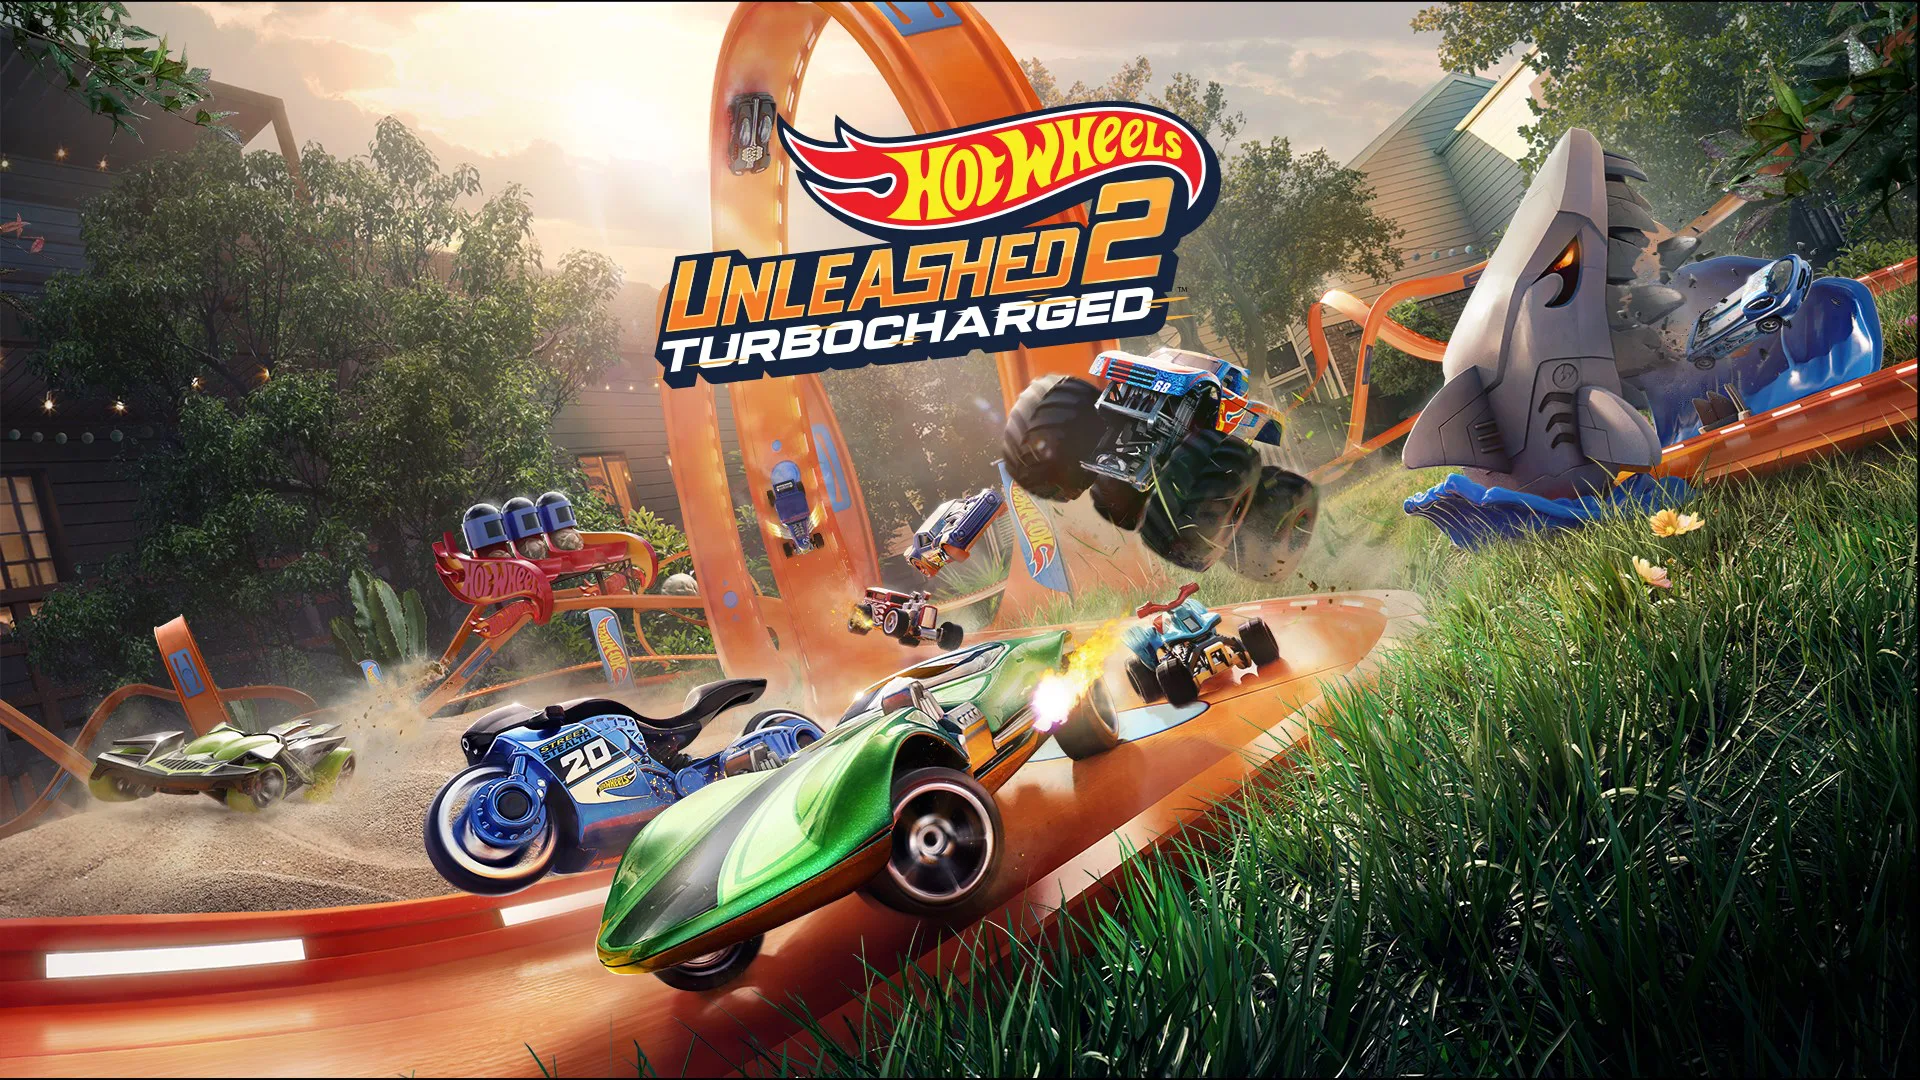 News about Hot Wheels Unleashed 2 • Nintendo Connect